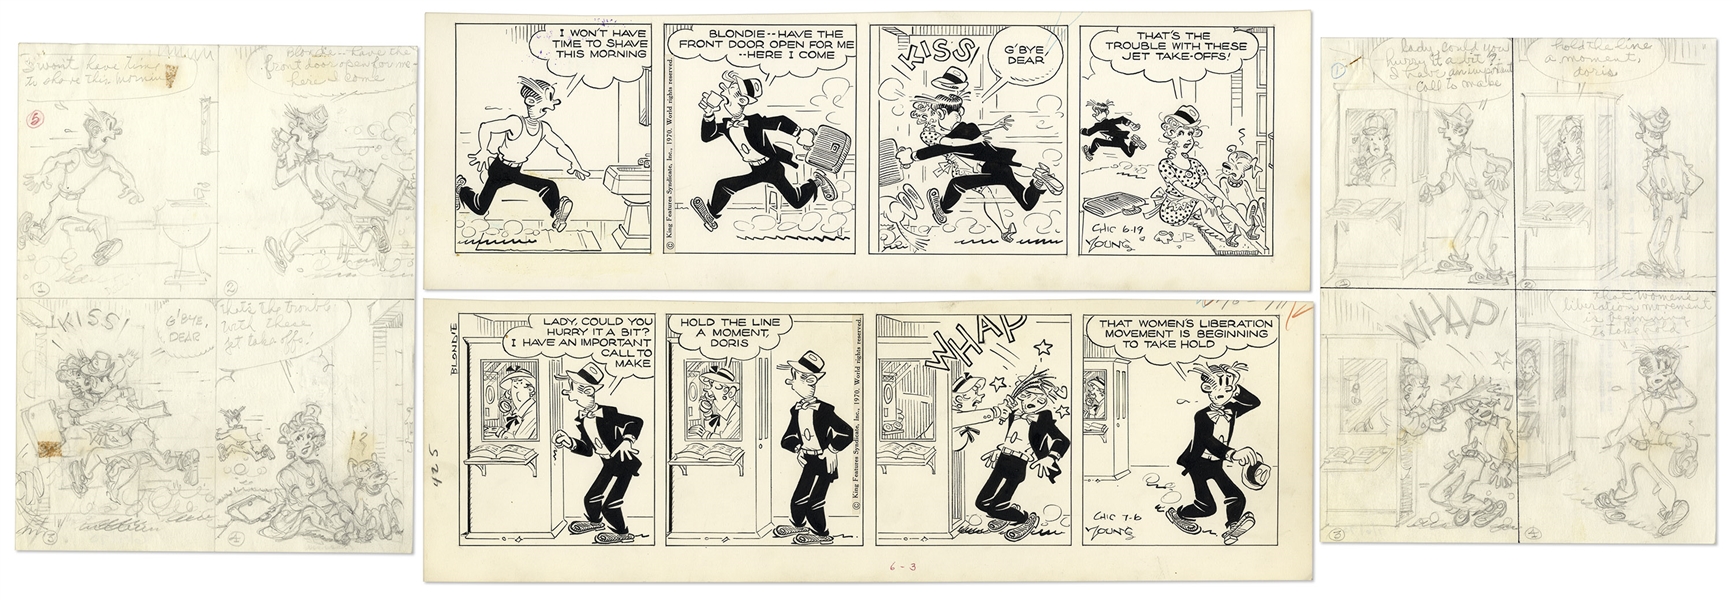 2 Chic Young Hand-Drawn ''Blondie'' Comic Strips From 1970 -- With Chic Young's Original Artwork for Both